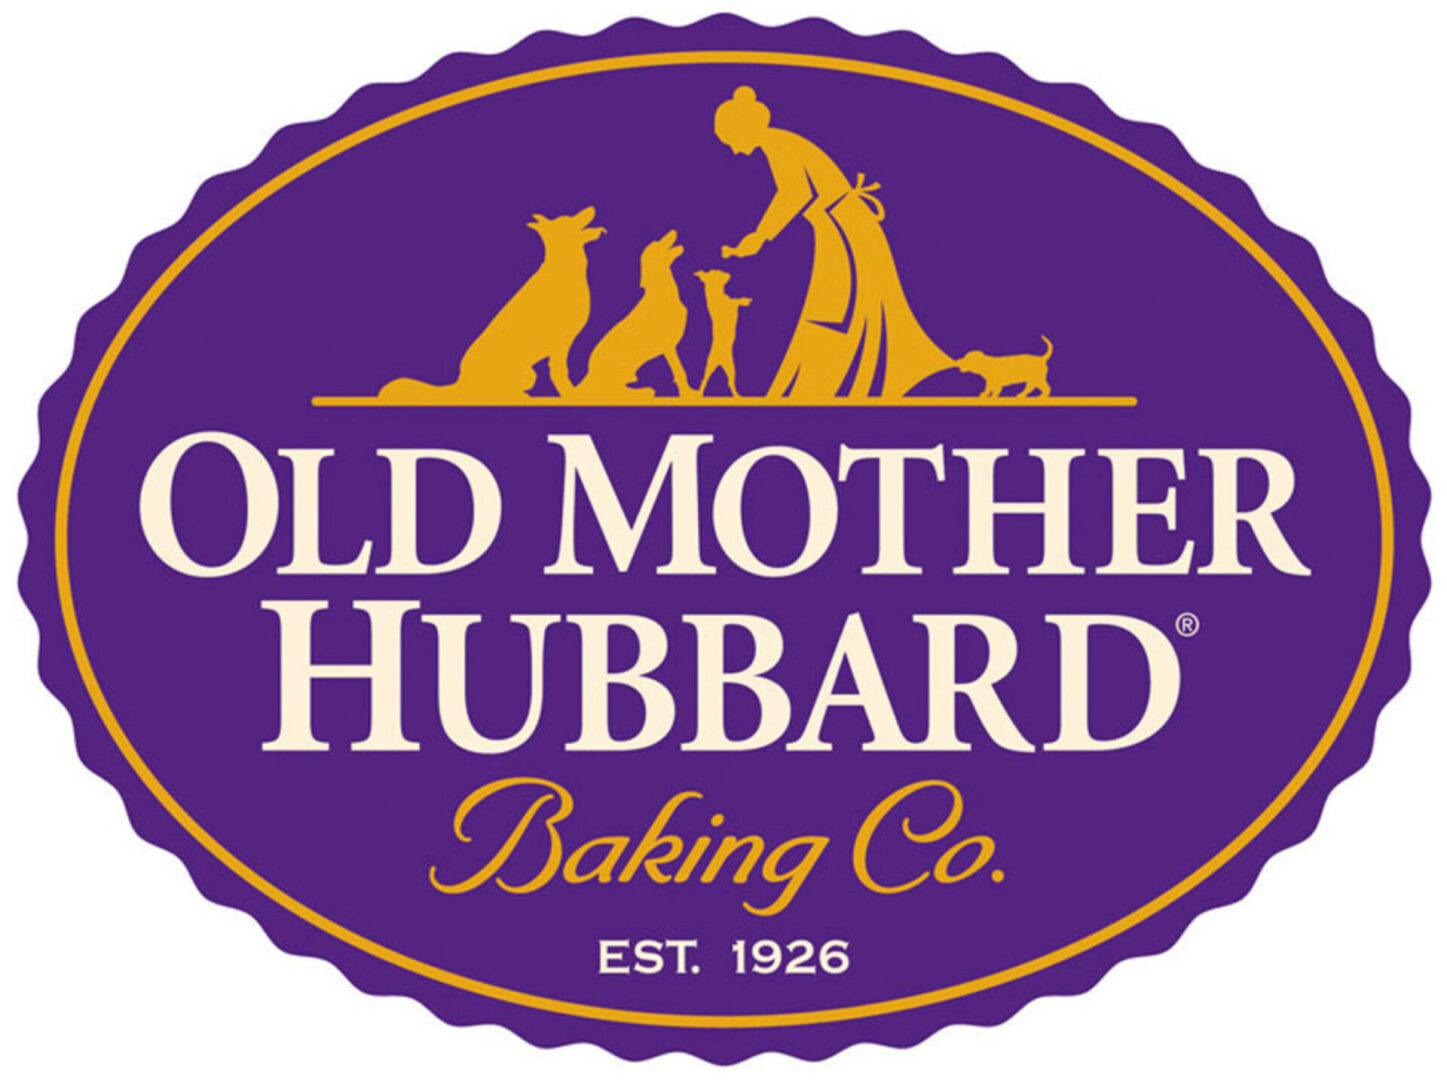 A purple and yellow logo for old mother hubbard baking company.